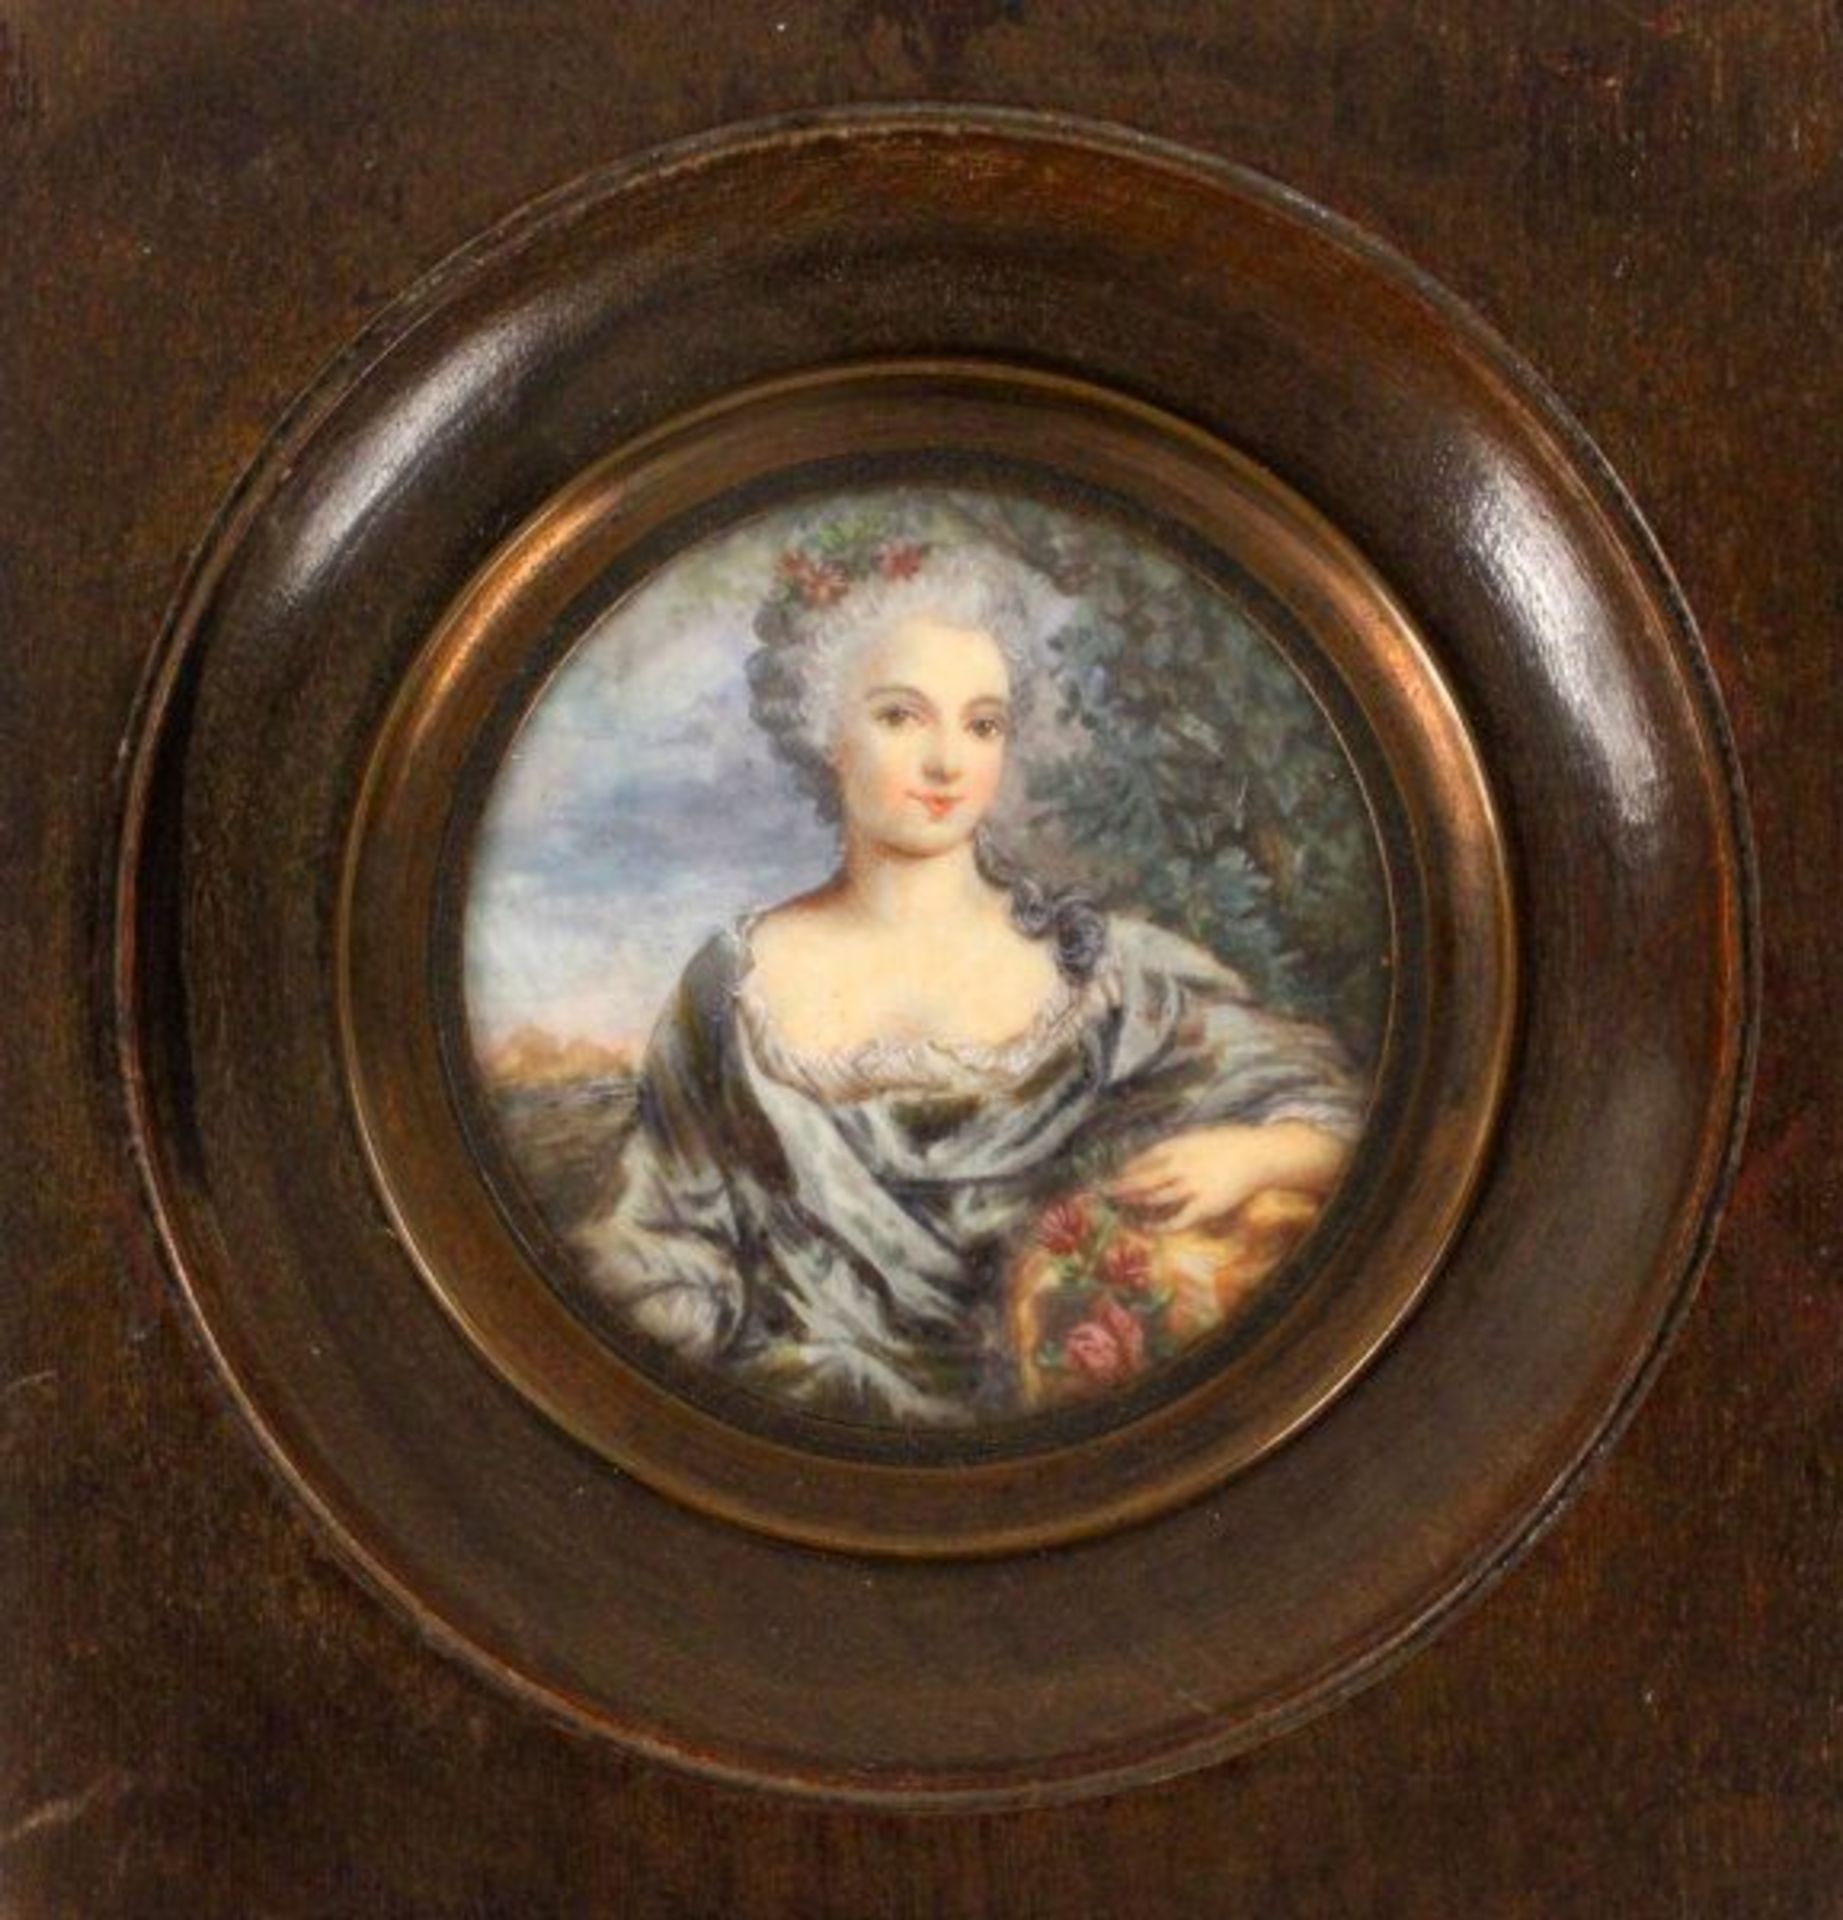 MINIATURE France after 1900 Portrait of a Lady. Painted on ivory. D iameter 6cm, with frame 11,